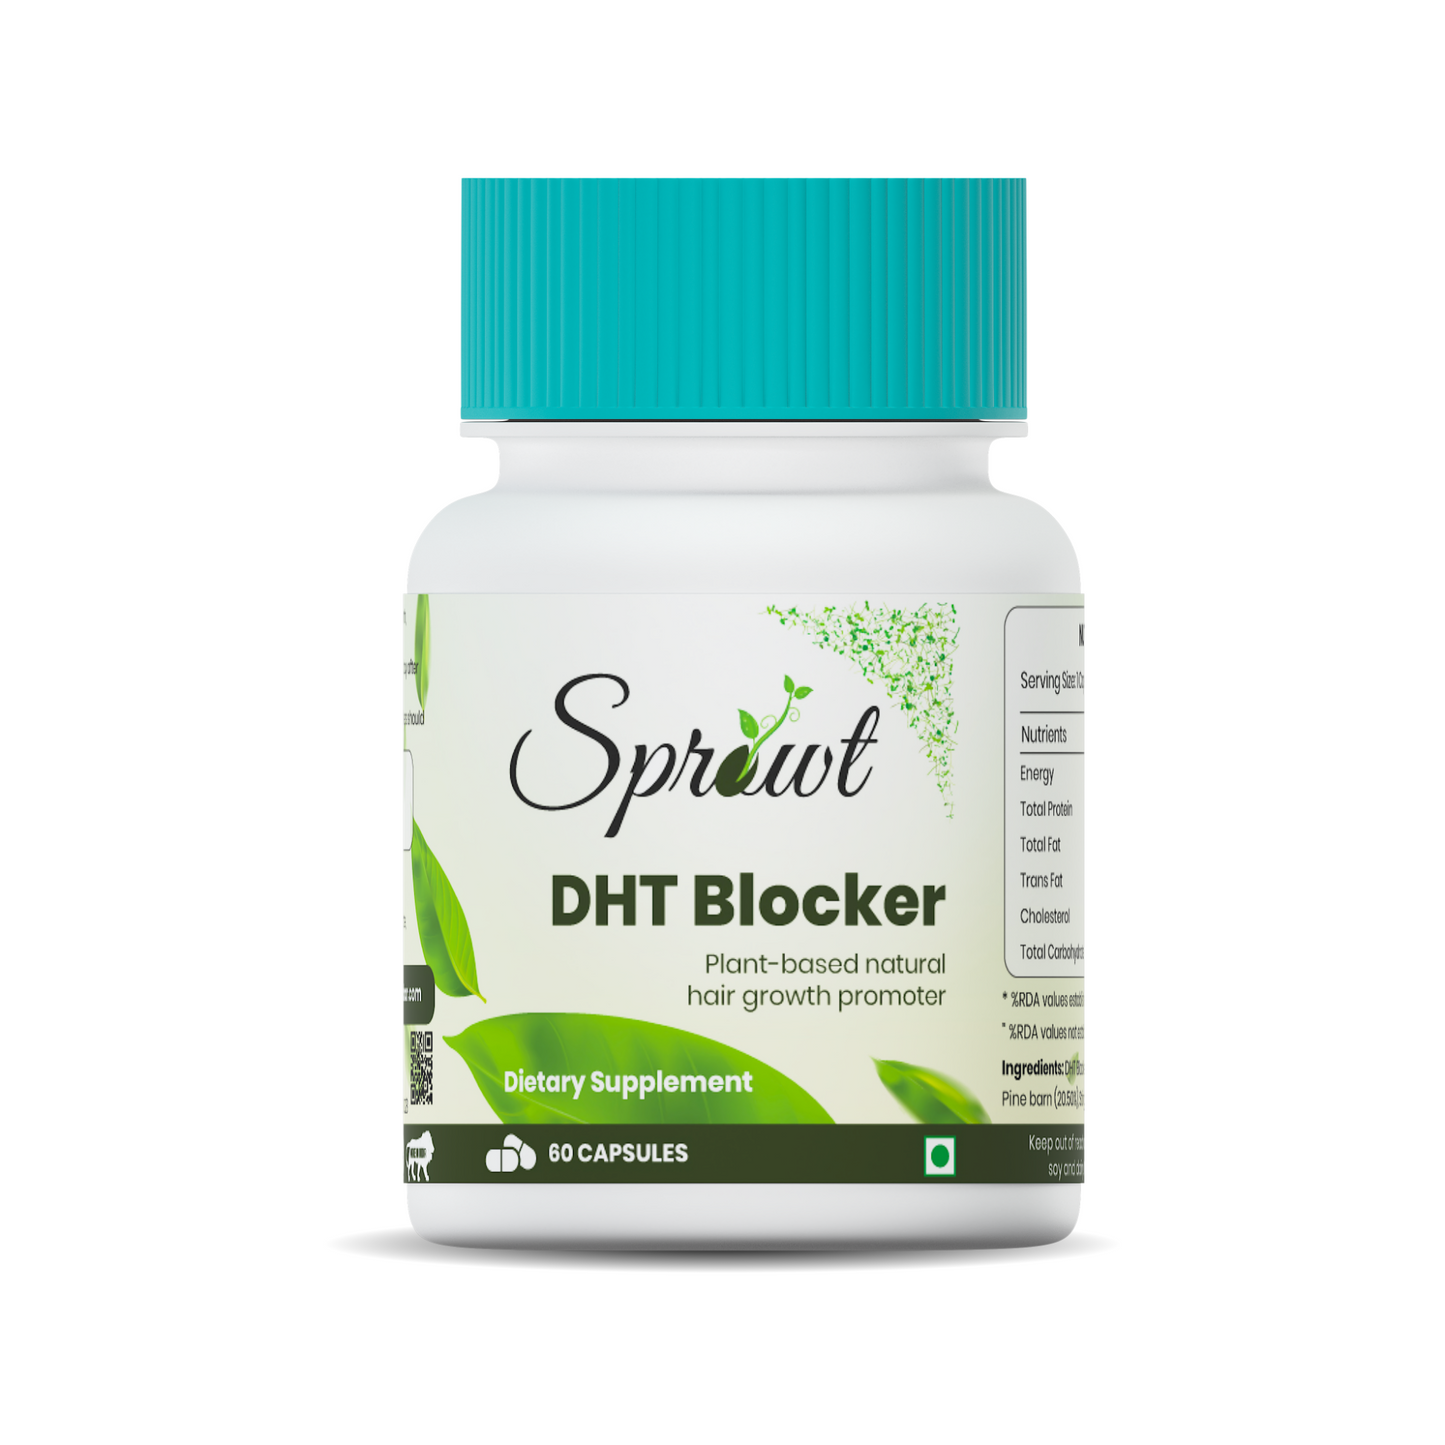 Sprowt Plant Based DHT Blocker Capsule for Hair Growth, Helps Reduce Hair Fall | Pack of 3, 60 Capsules